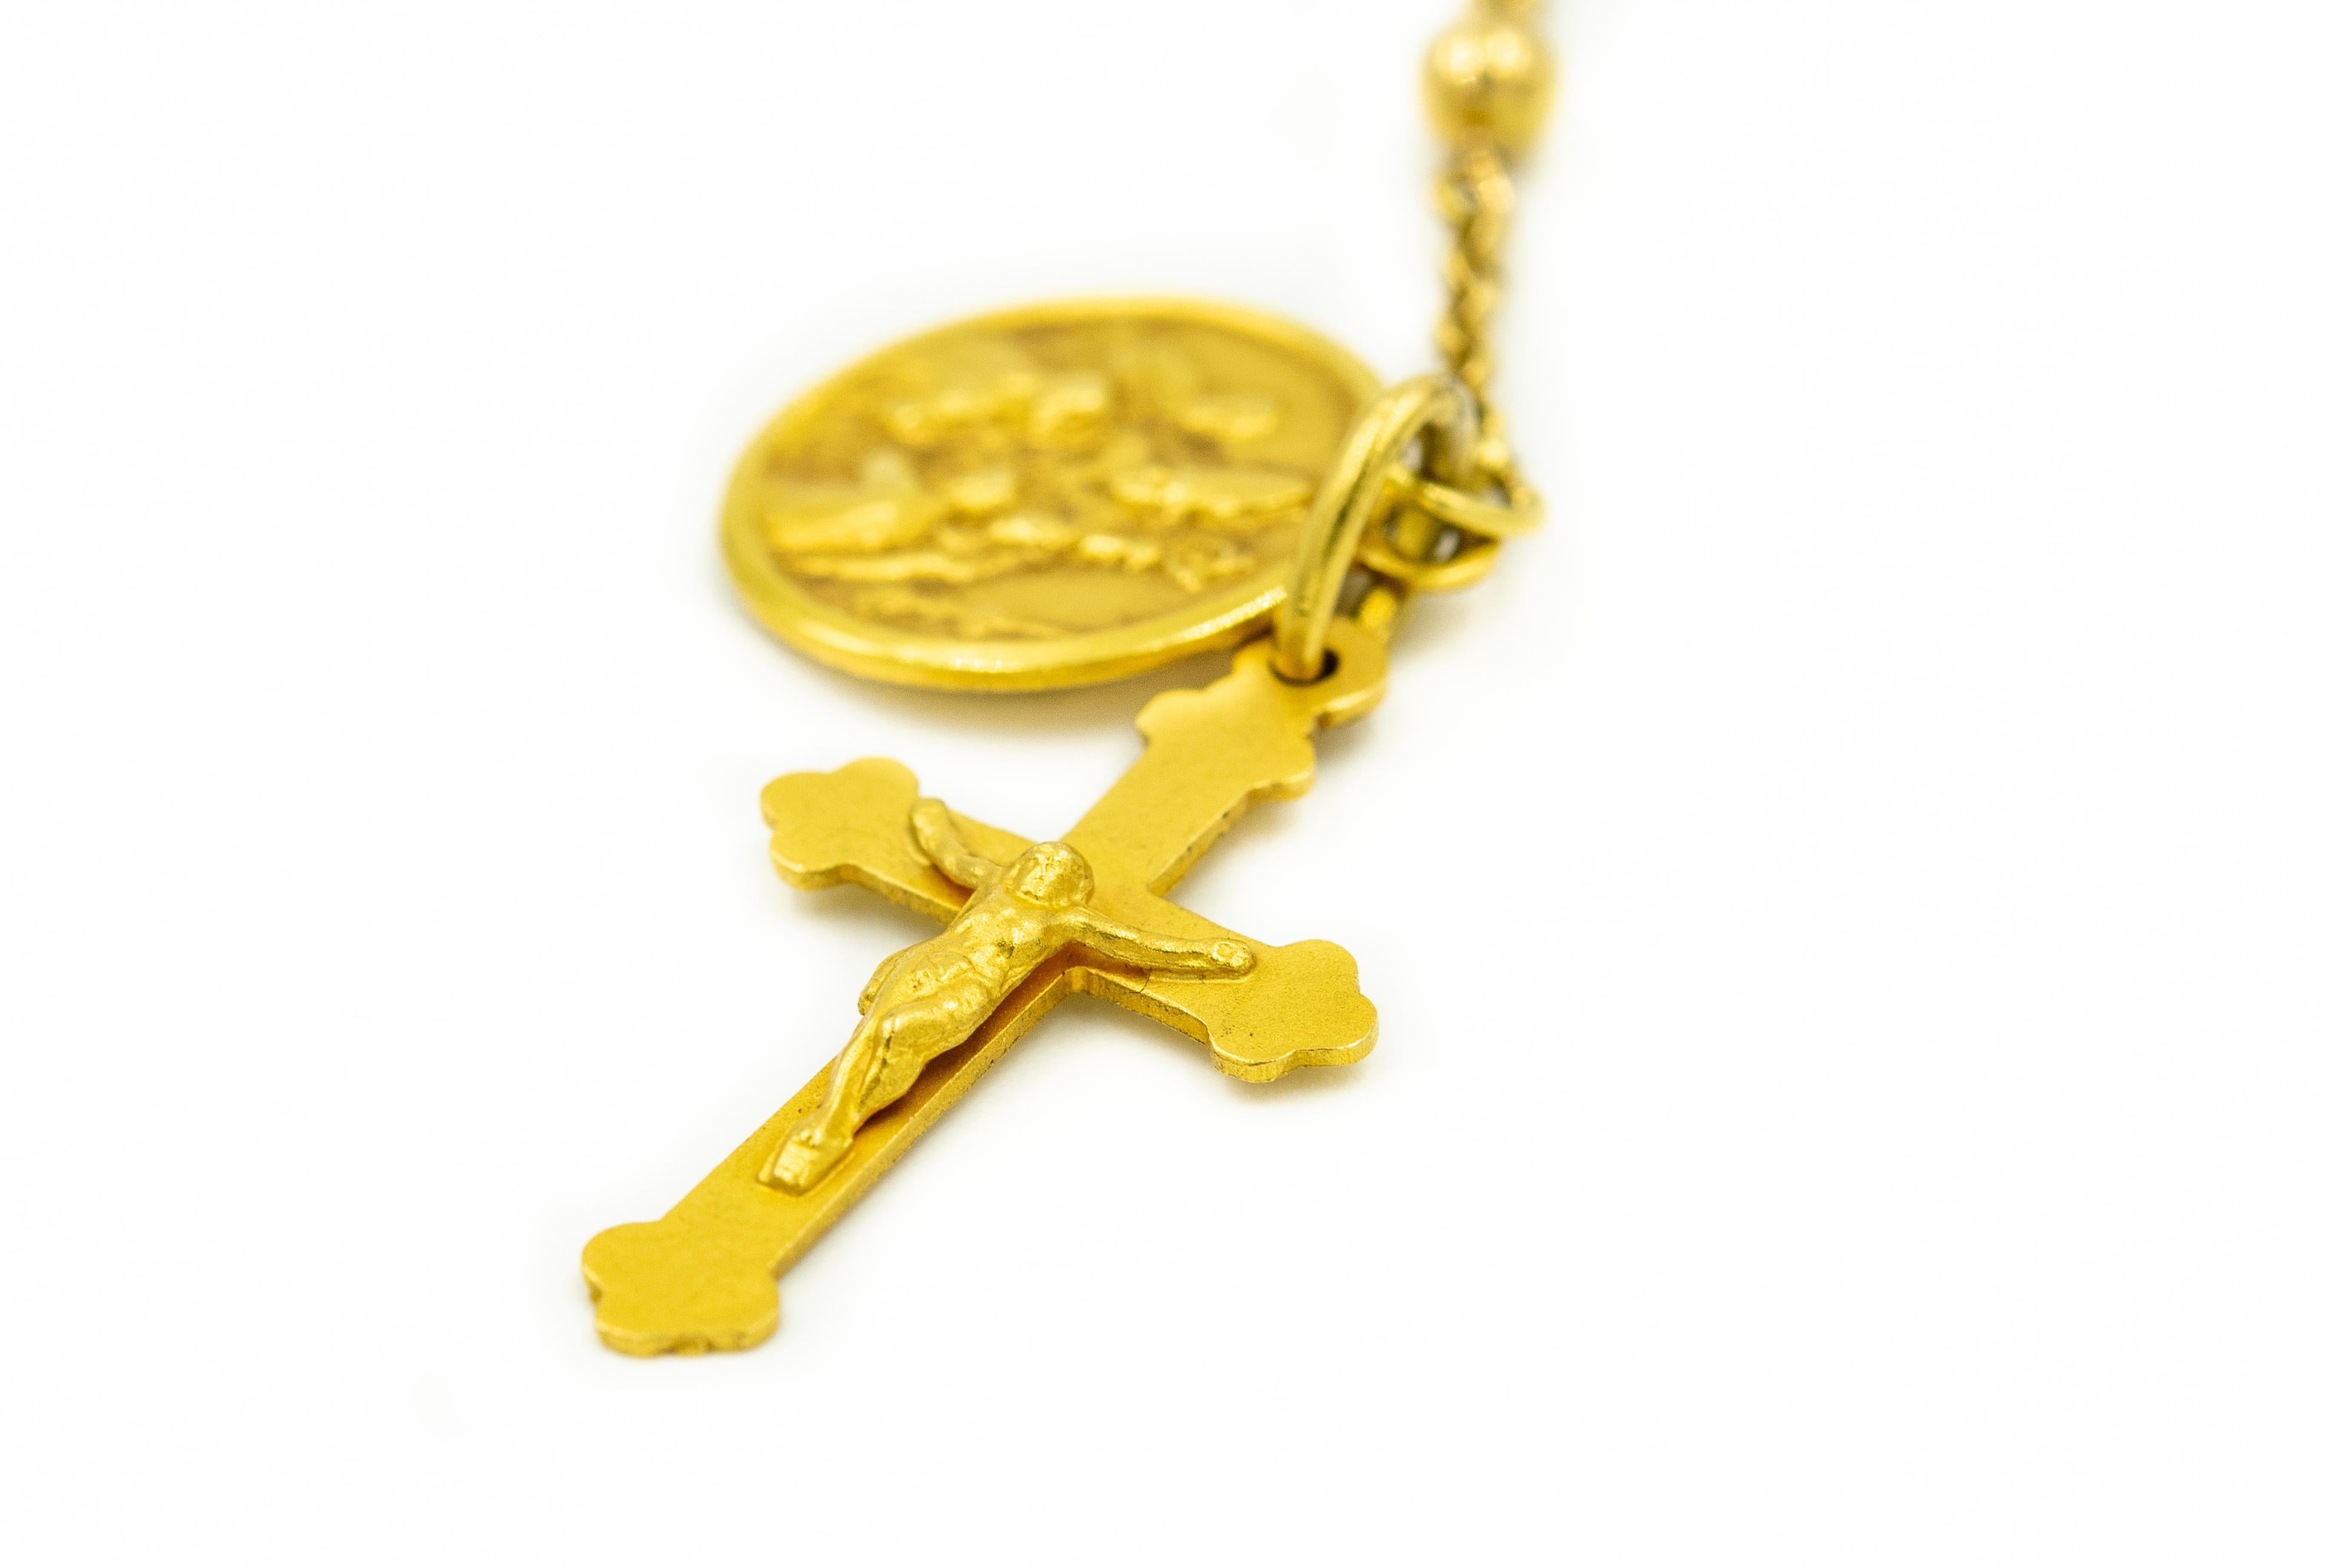 20th Century 18k yellow gold Italian Rosary with a cross pendant as well as the Memory of Confirmation Ricordo Della Cresima Pendant.

This is a Rosary not a necklace.  If you want to wear it as a necklace - you would need to add a clasp.  If you